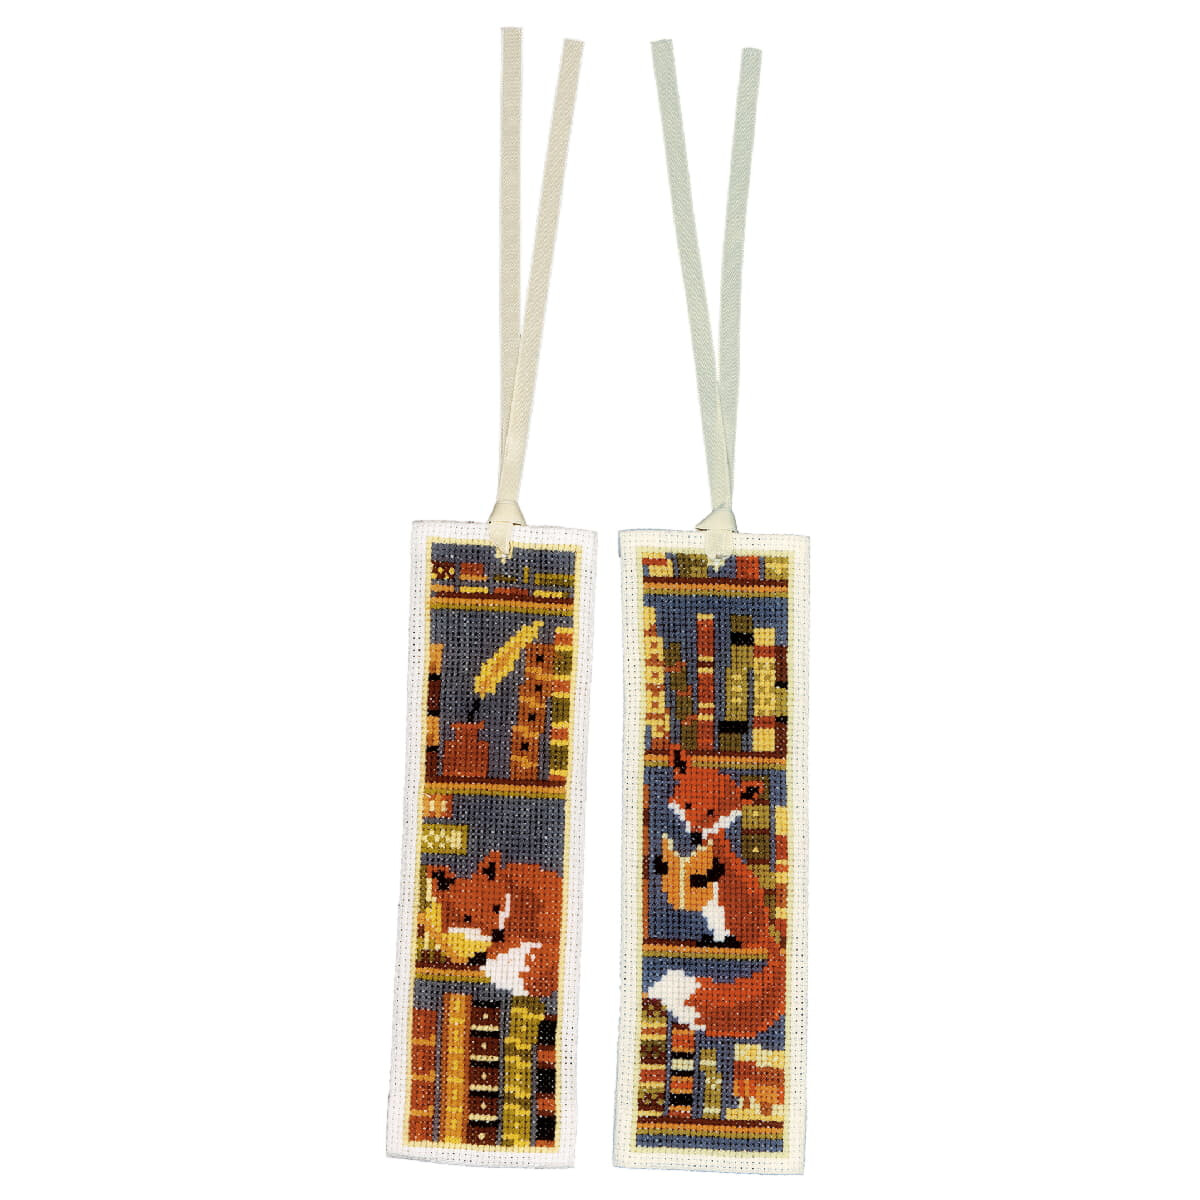 Vervaco bookmark counted cross stitch kit "Foxes in...